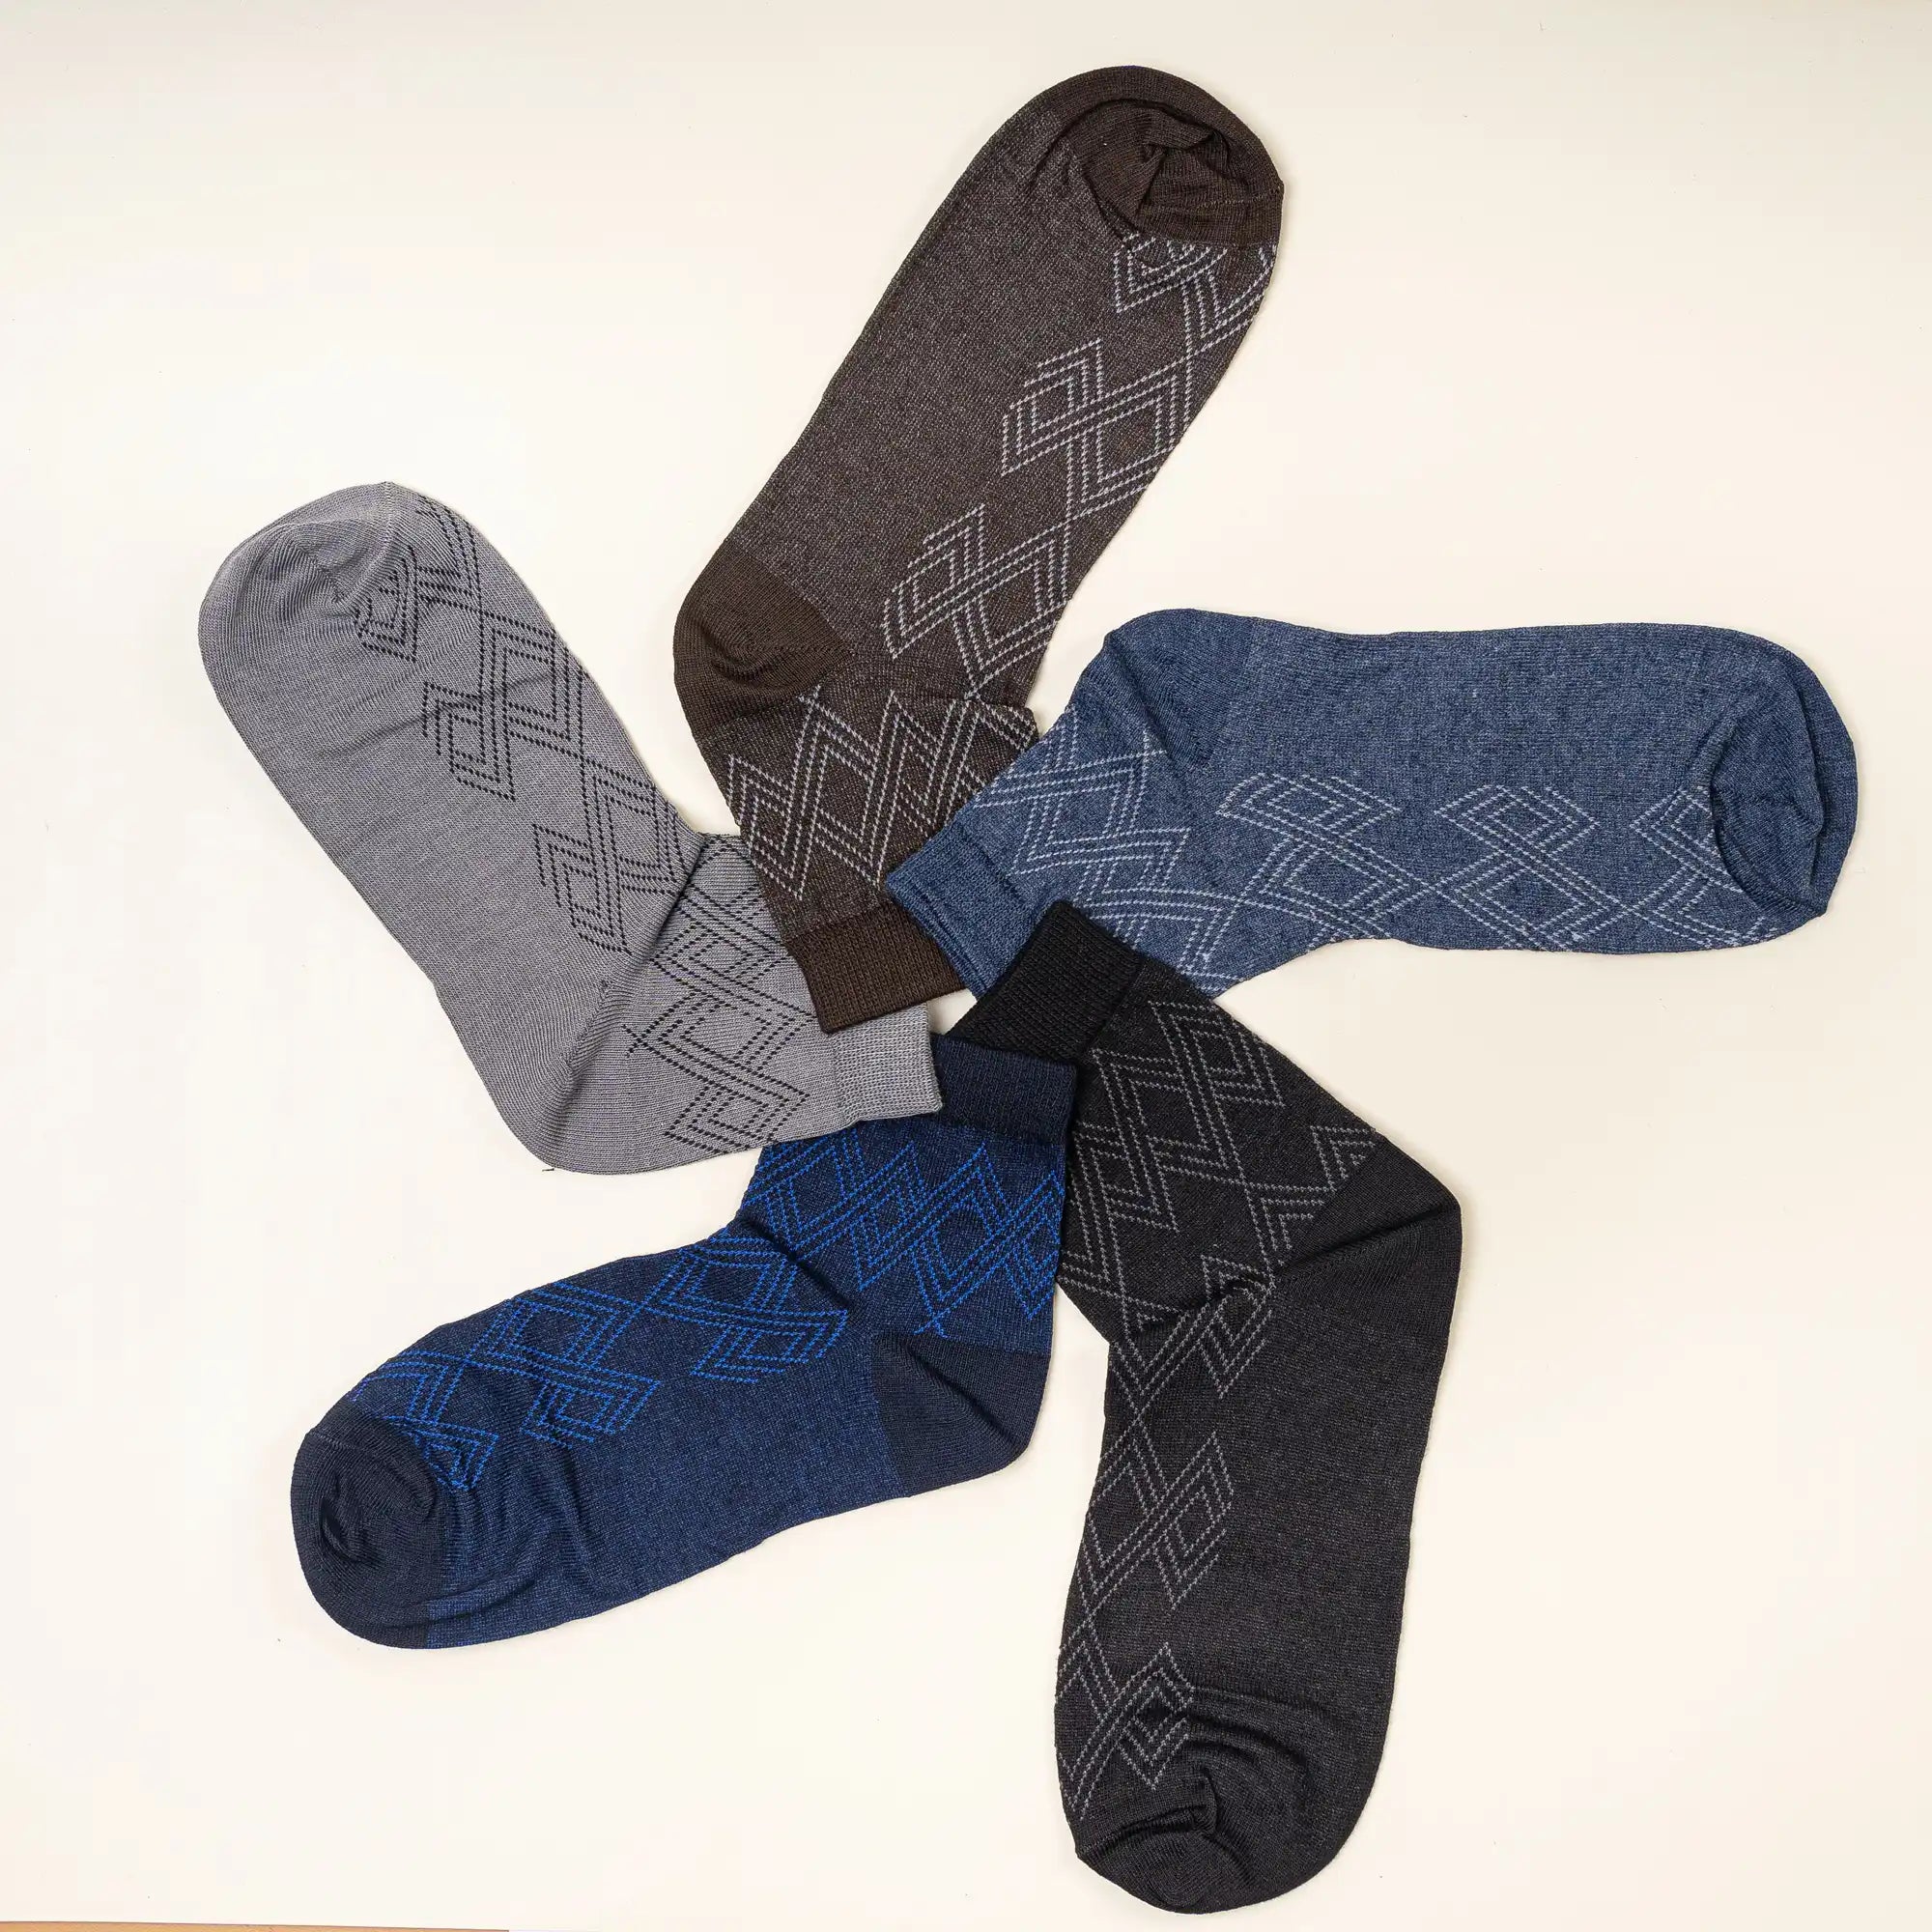 Young Wings Men's Multi Colour Cotton Fabric Solid Ankle Length Socks - Pack of 5, Style no. 2304-M1